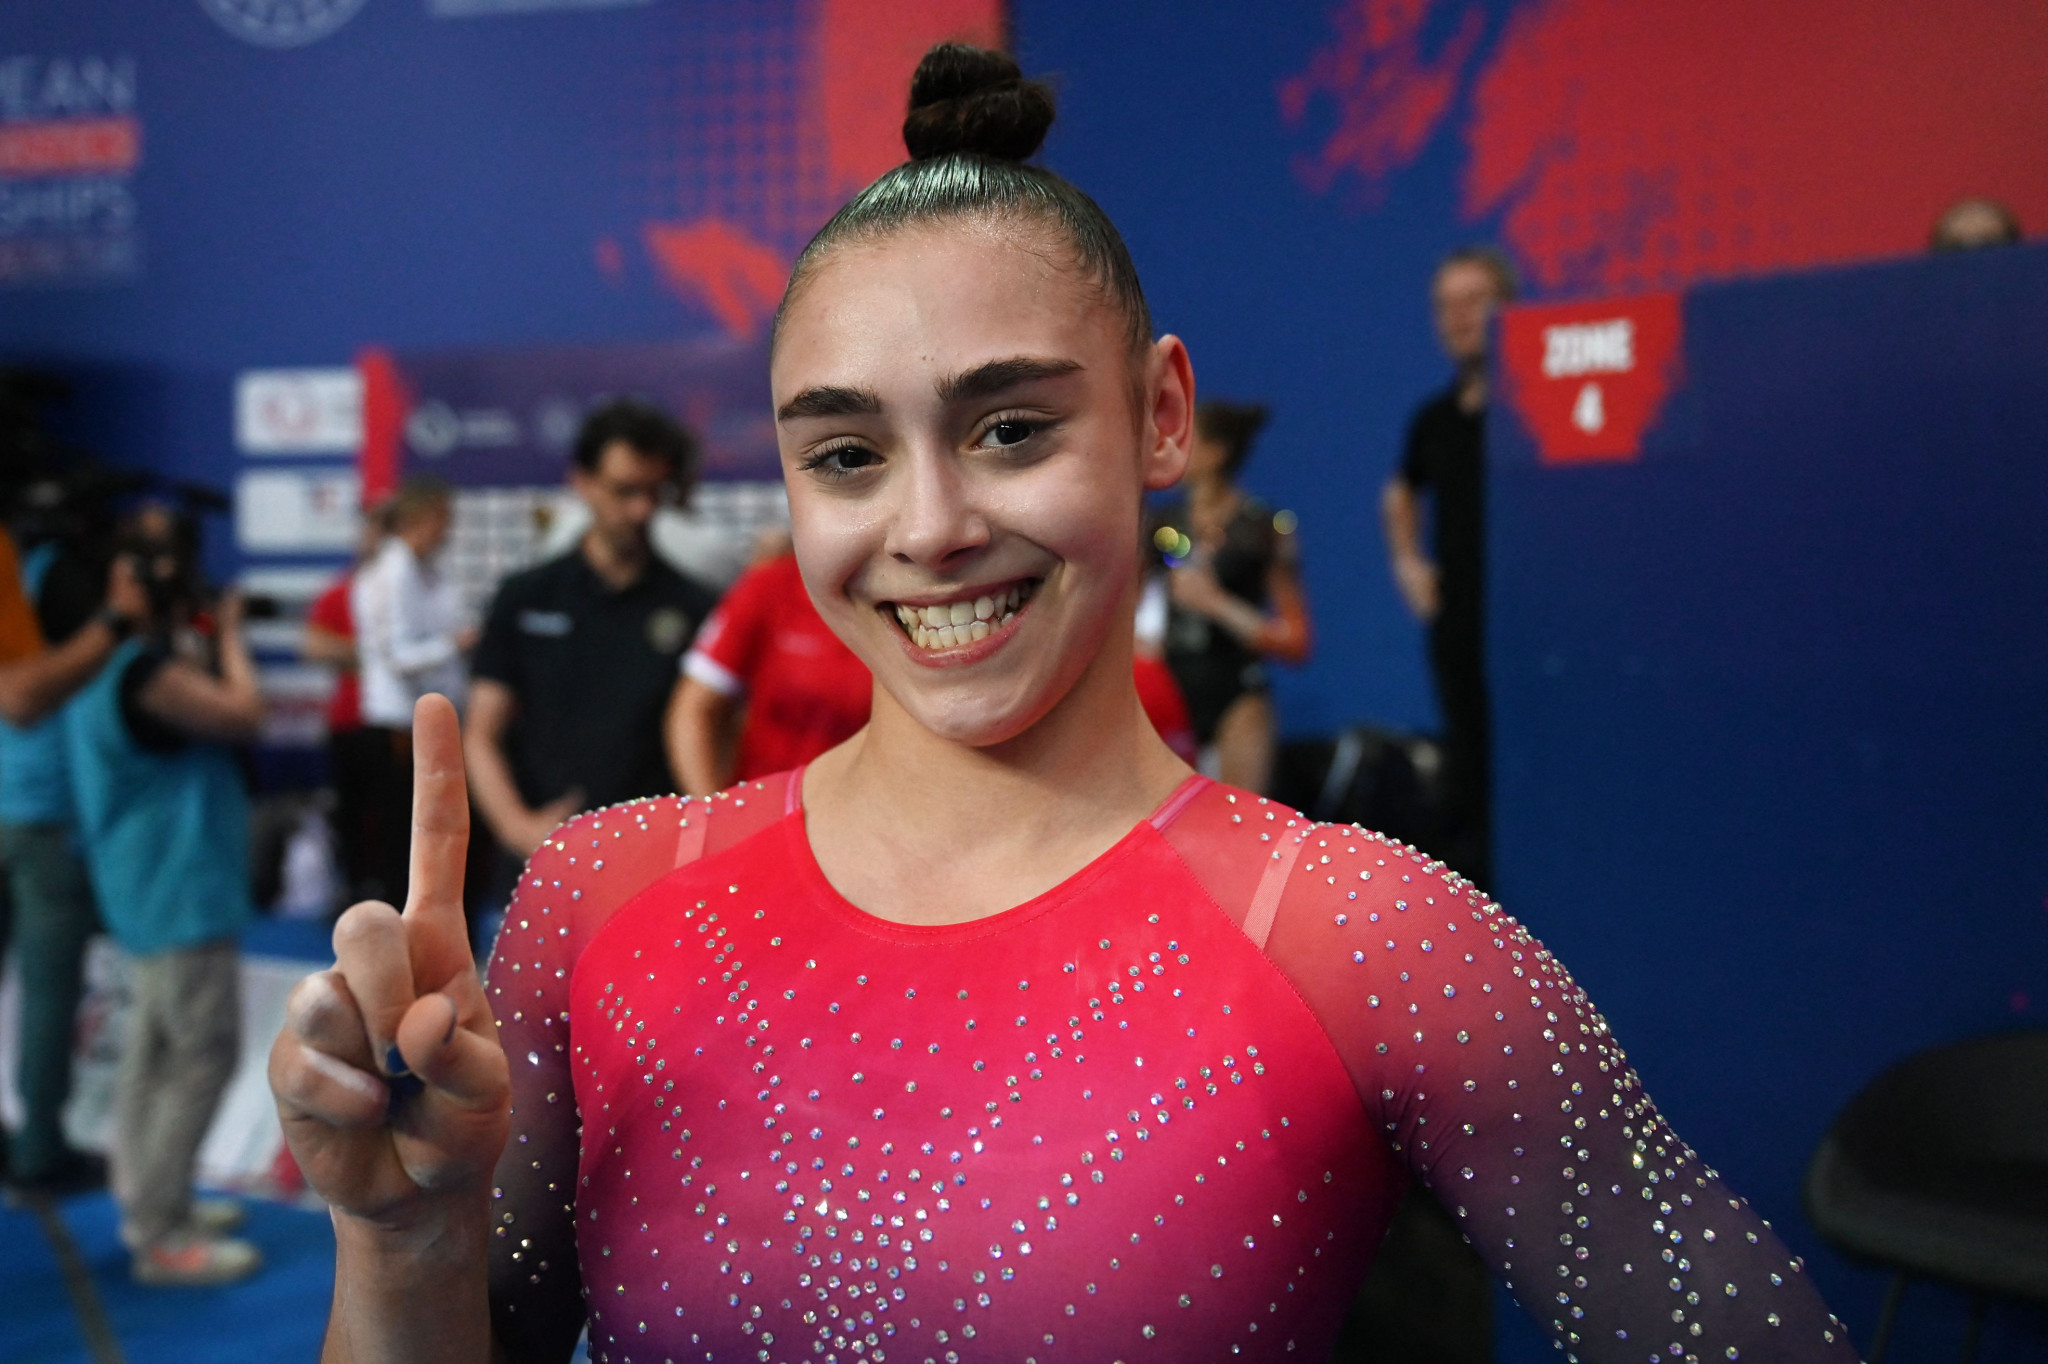 Gadirova believes Russia absence from team artistic gymnastics competition opens door for other nations